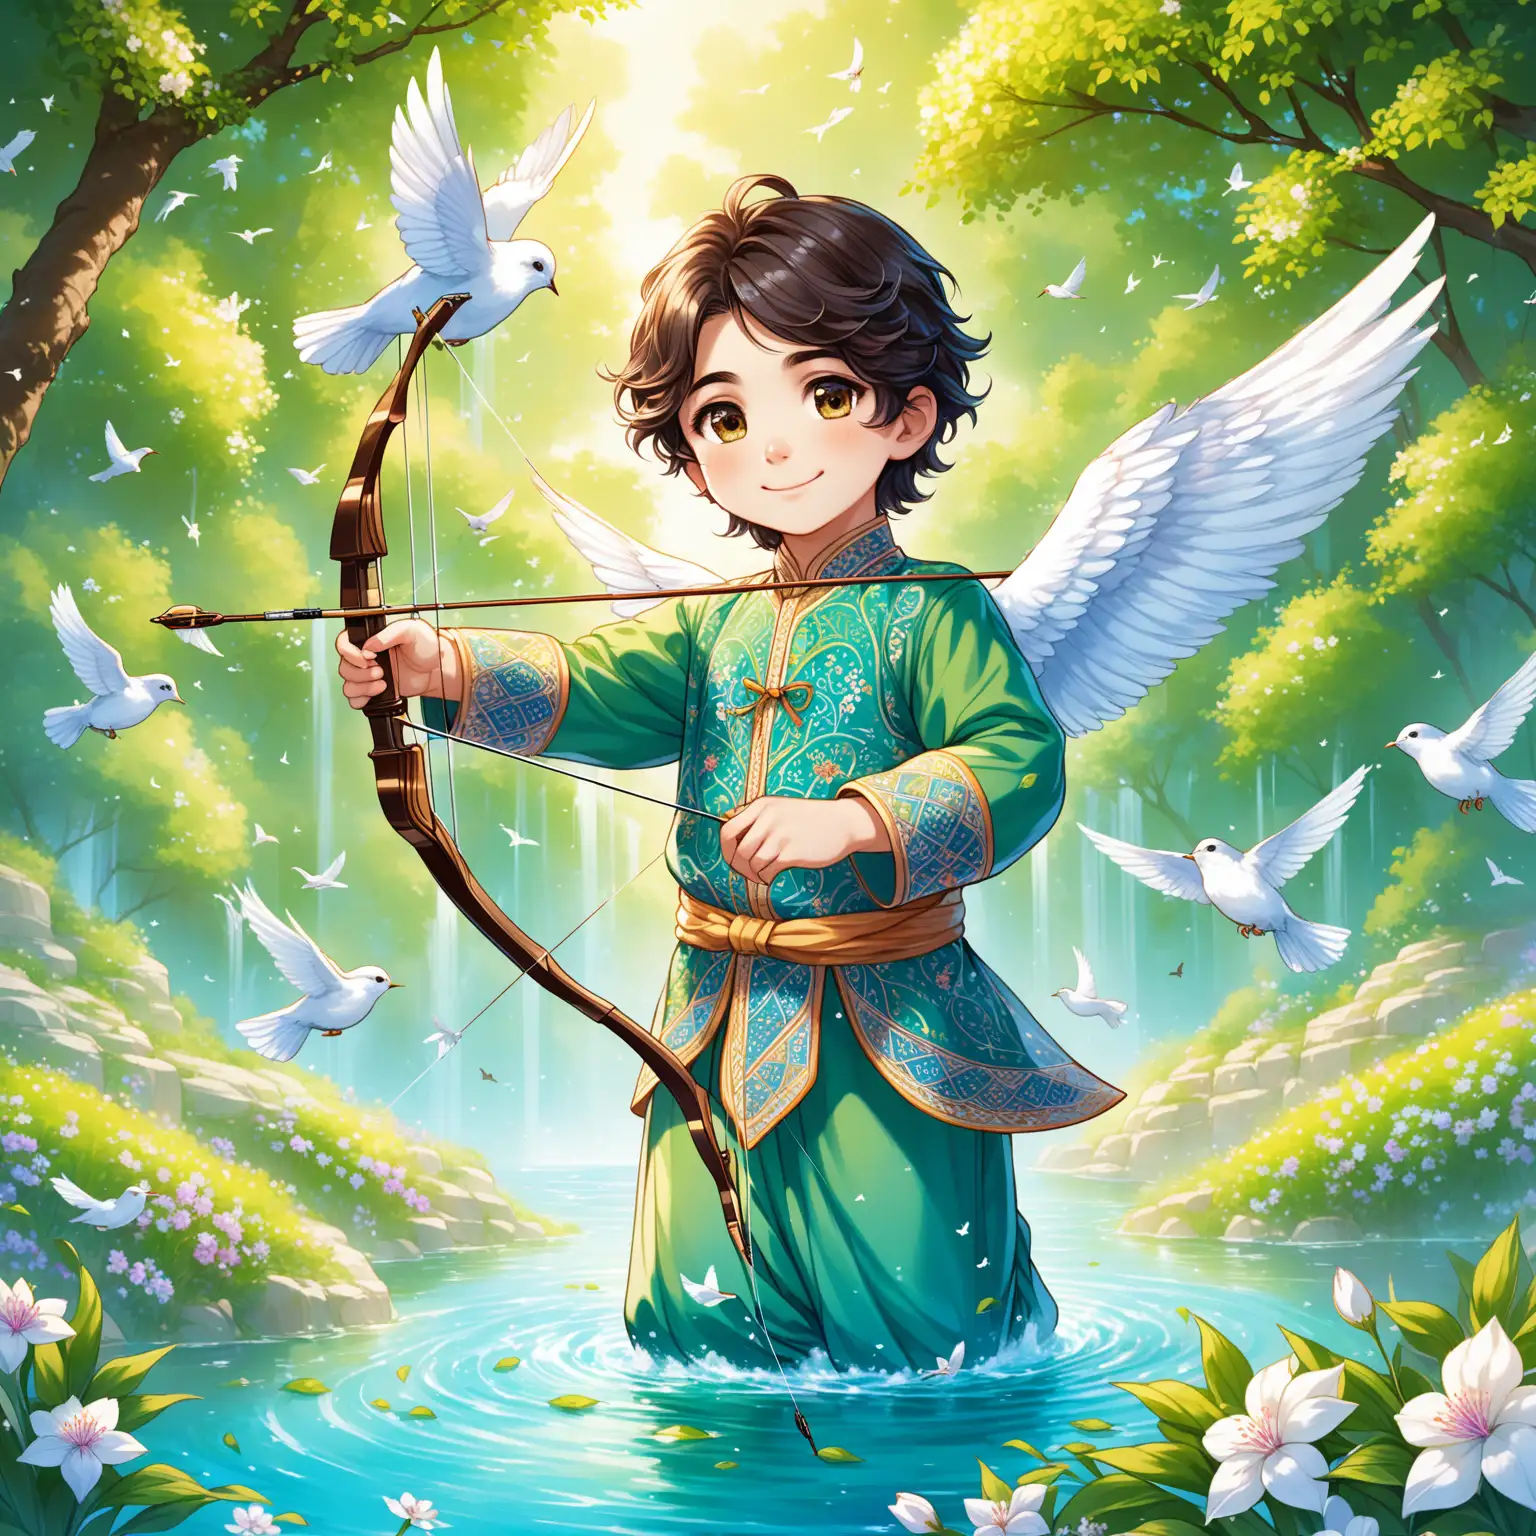 Character Persian 9 years old boy(shooting a bow at Sybil, smaller eyes, bigger nose, white skin, cute, smiling, clothes full of Persian designs, heavenly boy).

Atmosphere flowing water from the spring with flowers, nightingales and flying birds in spring.